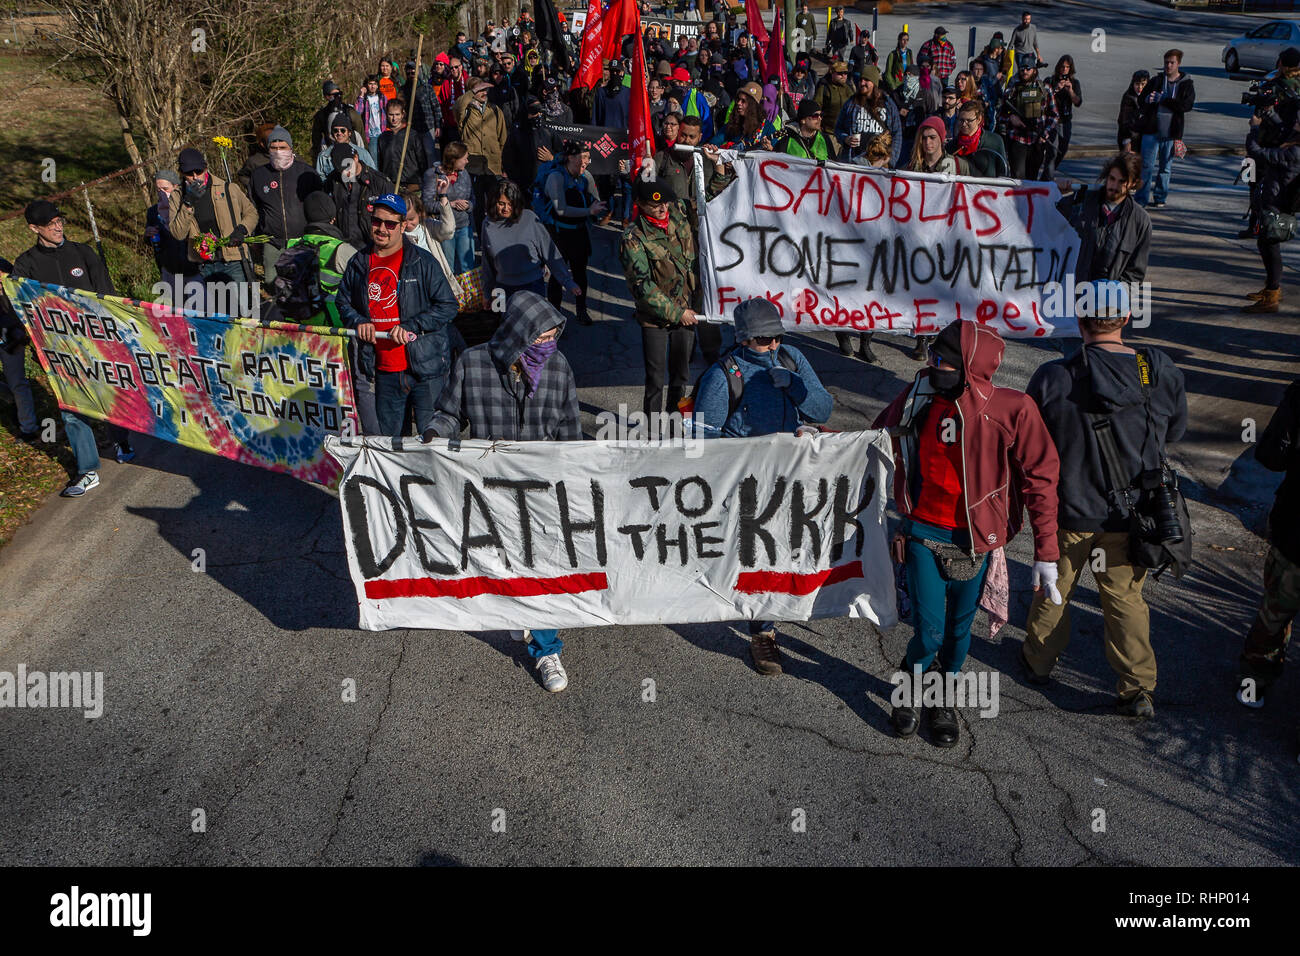 Stone Mountain, USA. 02nd Feb, 2019. On February 2, 2019, an anti-klan coalition, some of who were armed, held an action in Stone Mountain, Atlanta after a ‘White Power' rally disintegrated amid internal strife and safety concerns. Carved into the north face of Stone Mountain is the world's largest Confederate bas-relief sculpture, depicting three Confederate figures, Jefferson Davis, Robert E. Lee, and Thomas 'Stonewall' Jackson. Considered a 'sacred site' to the Ku Klux Klan, opponents have been calling for its removal. Credit: Michael Nigro/Pacific Press/Alamy Live News Stock Photo